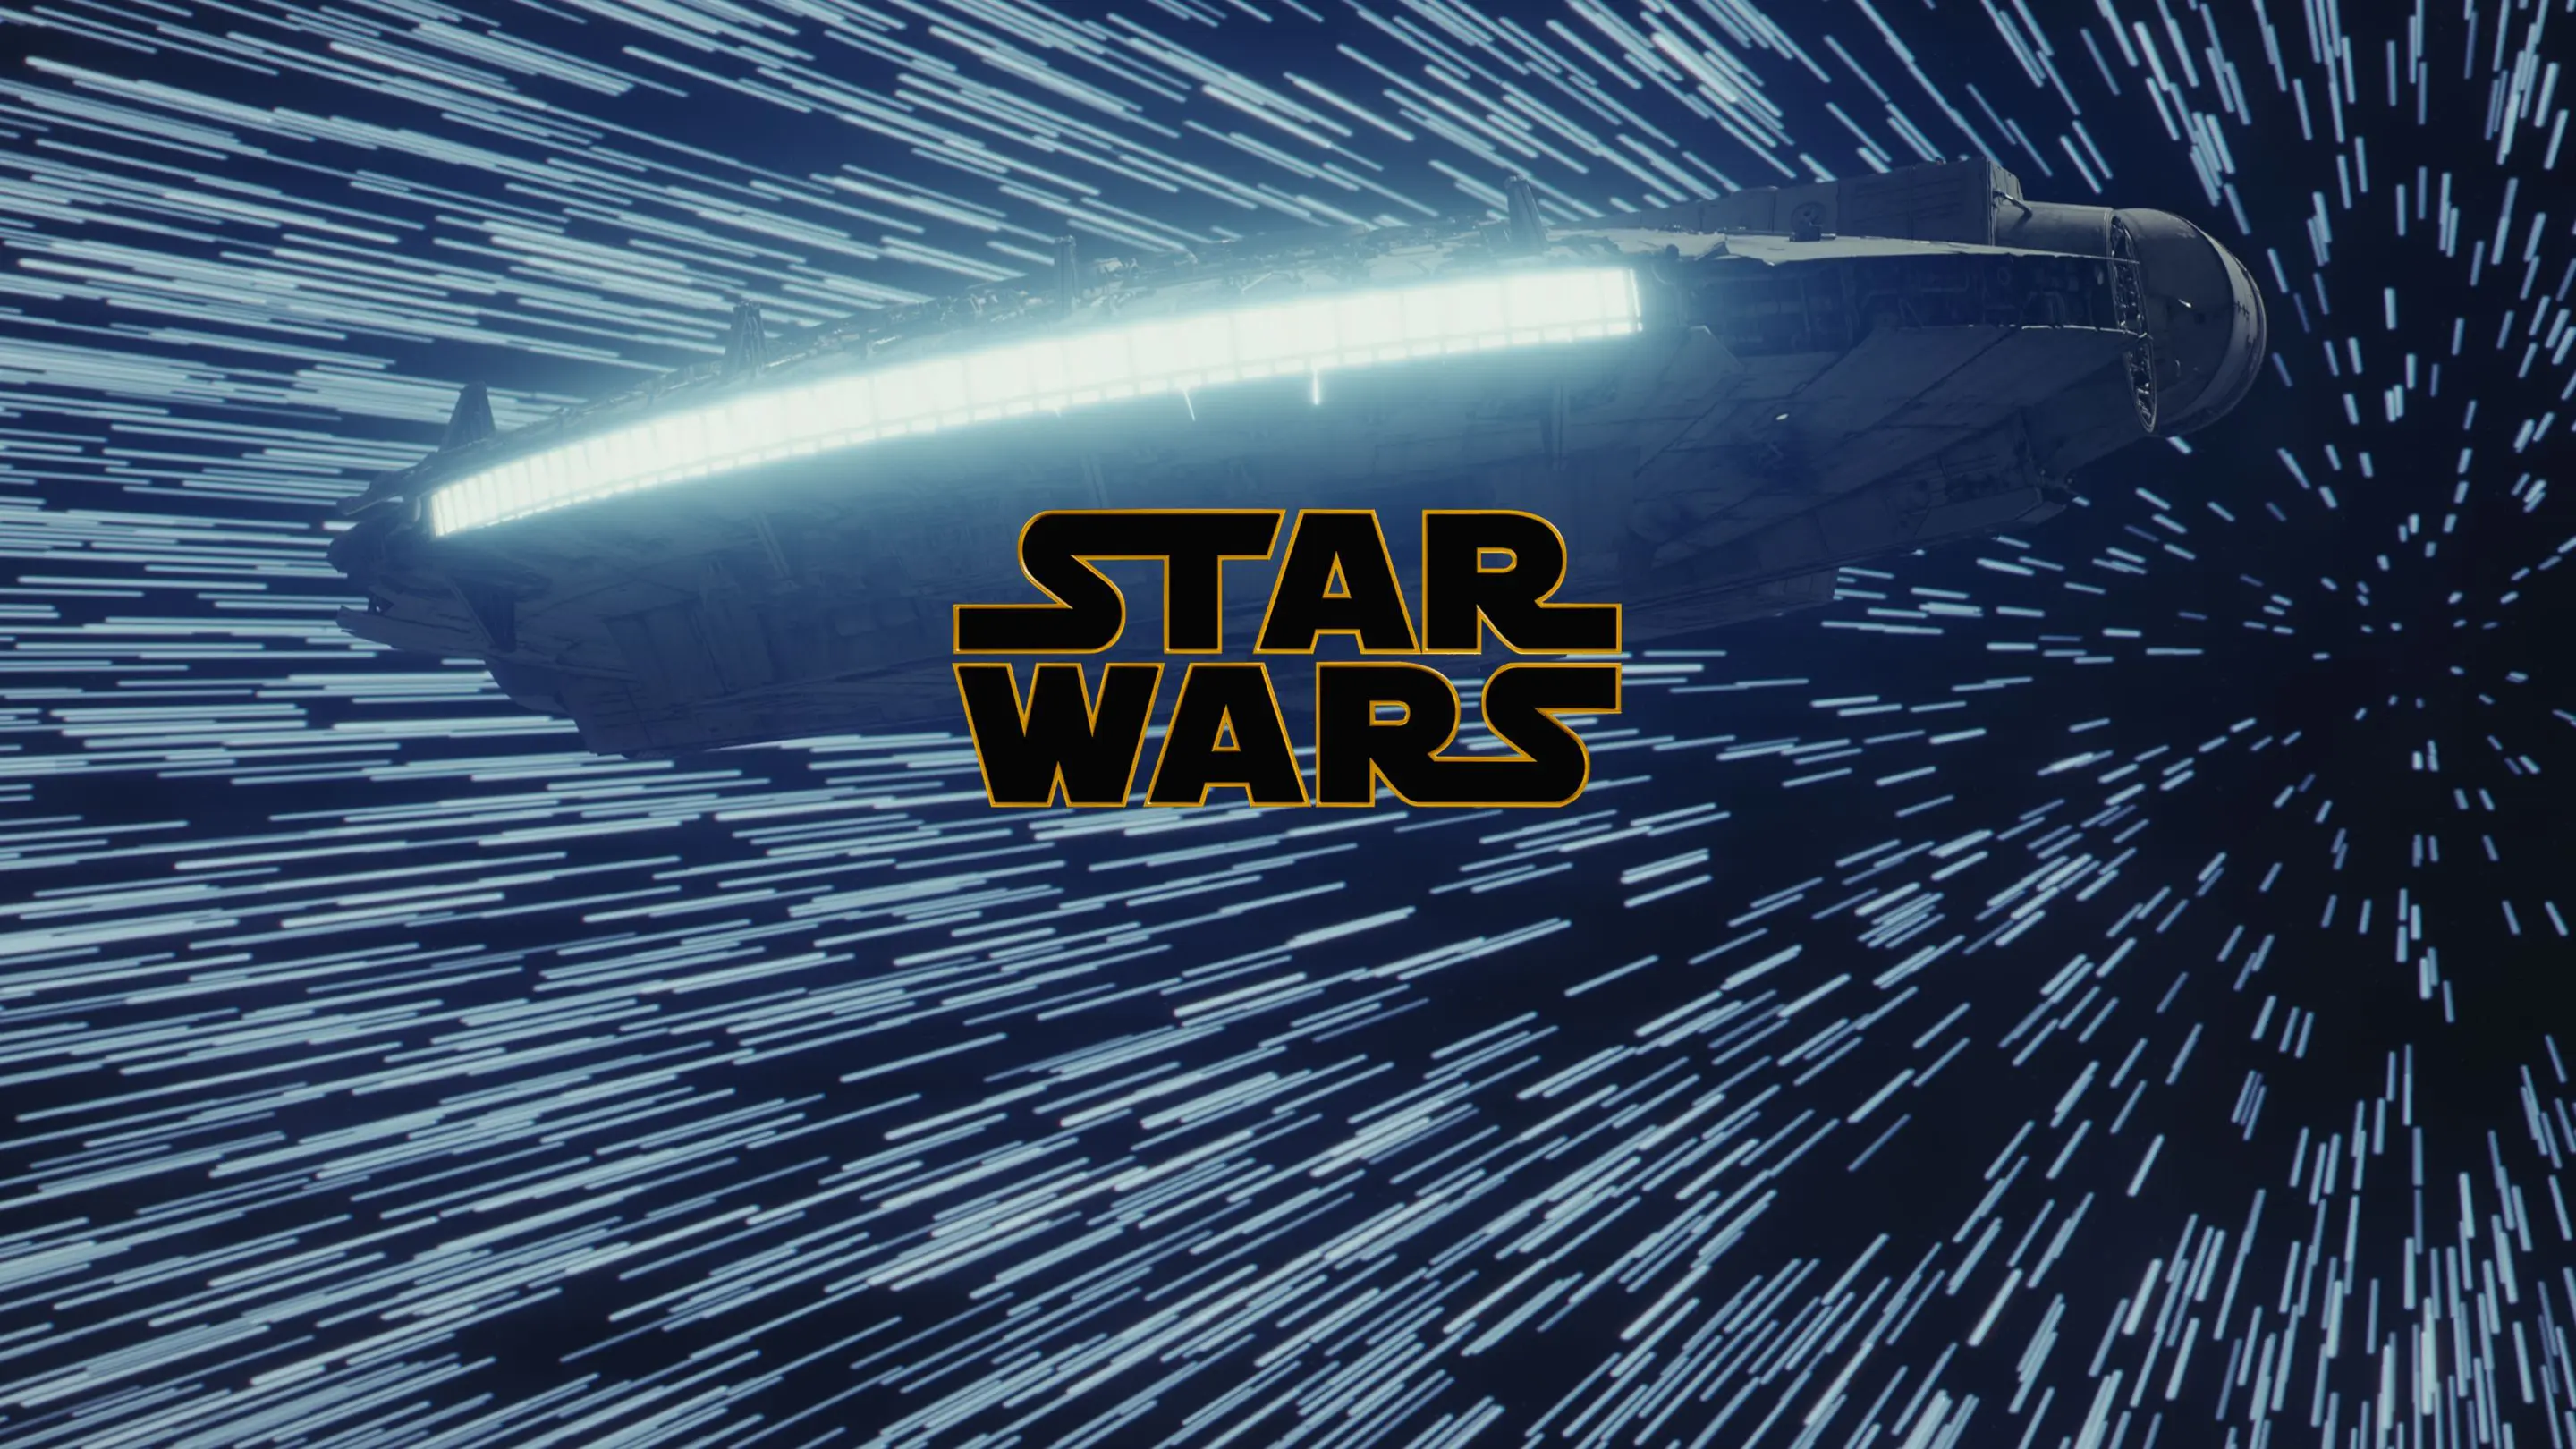 New Star Wars movie and TV releases planned for 2023 and beyond